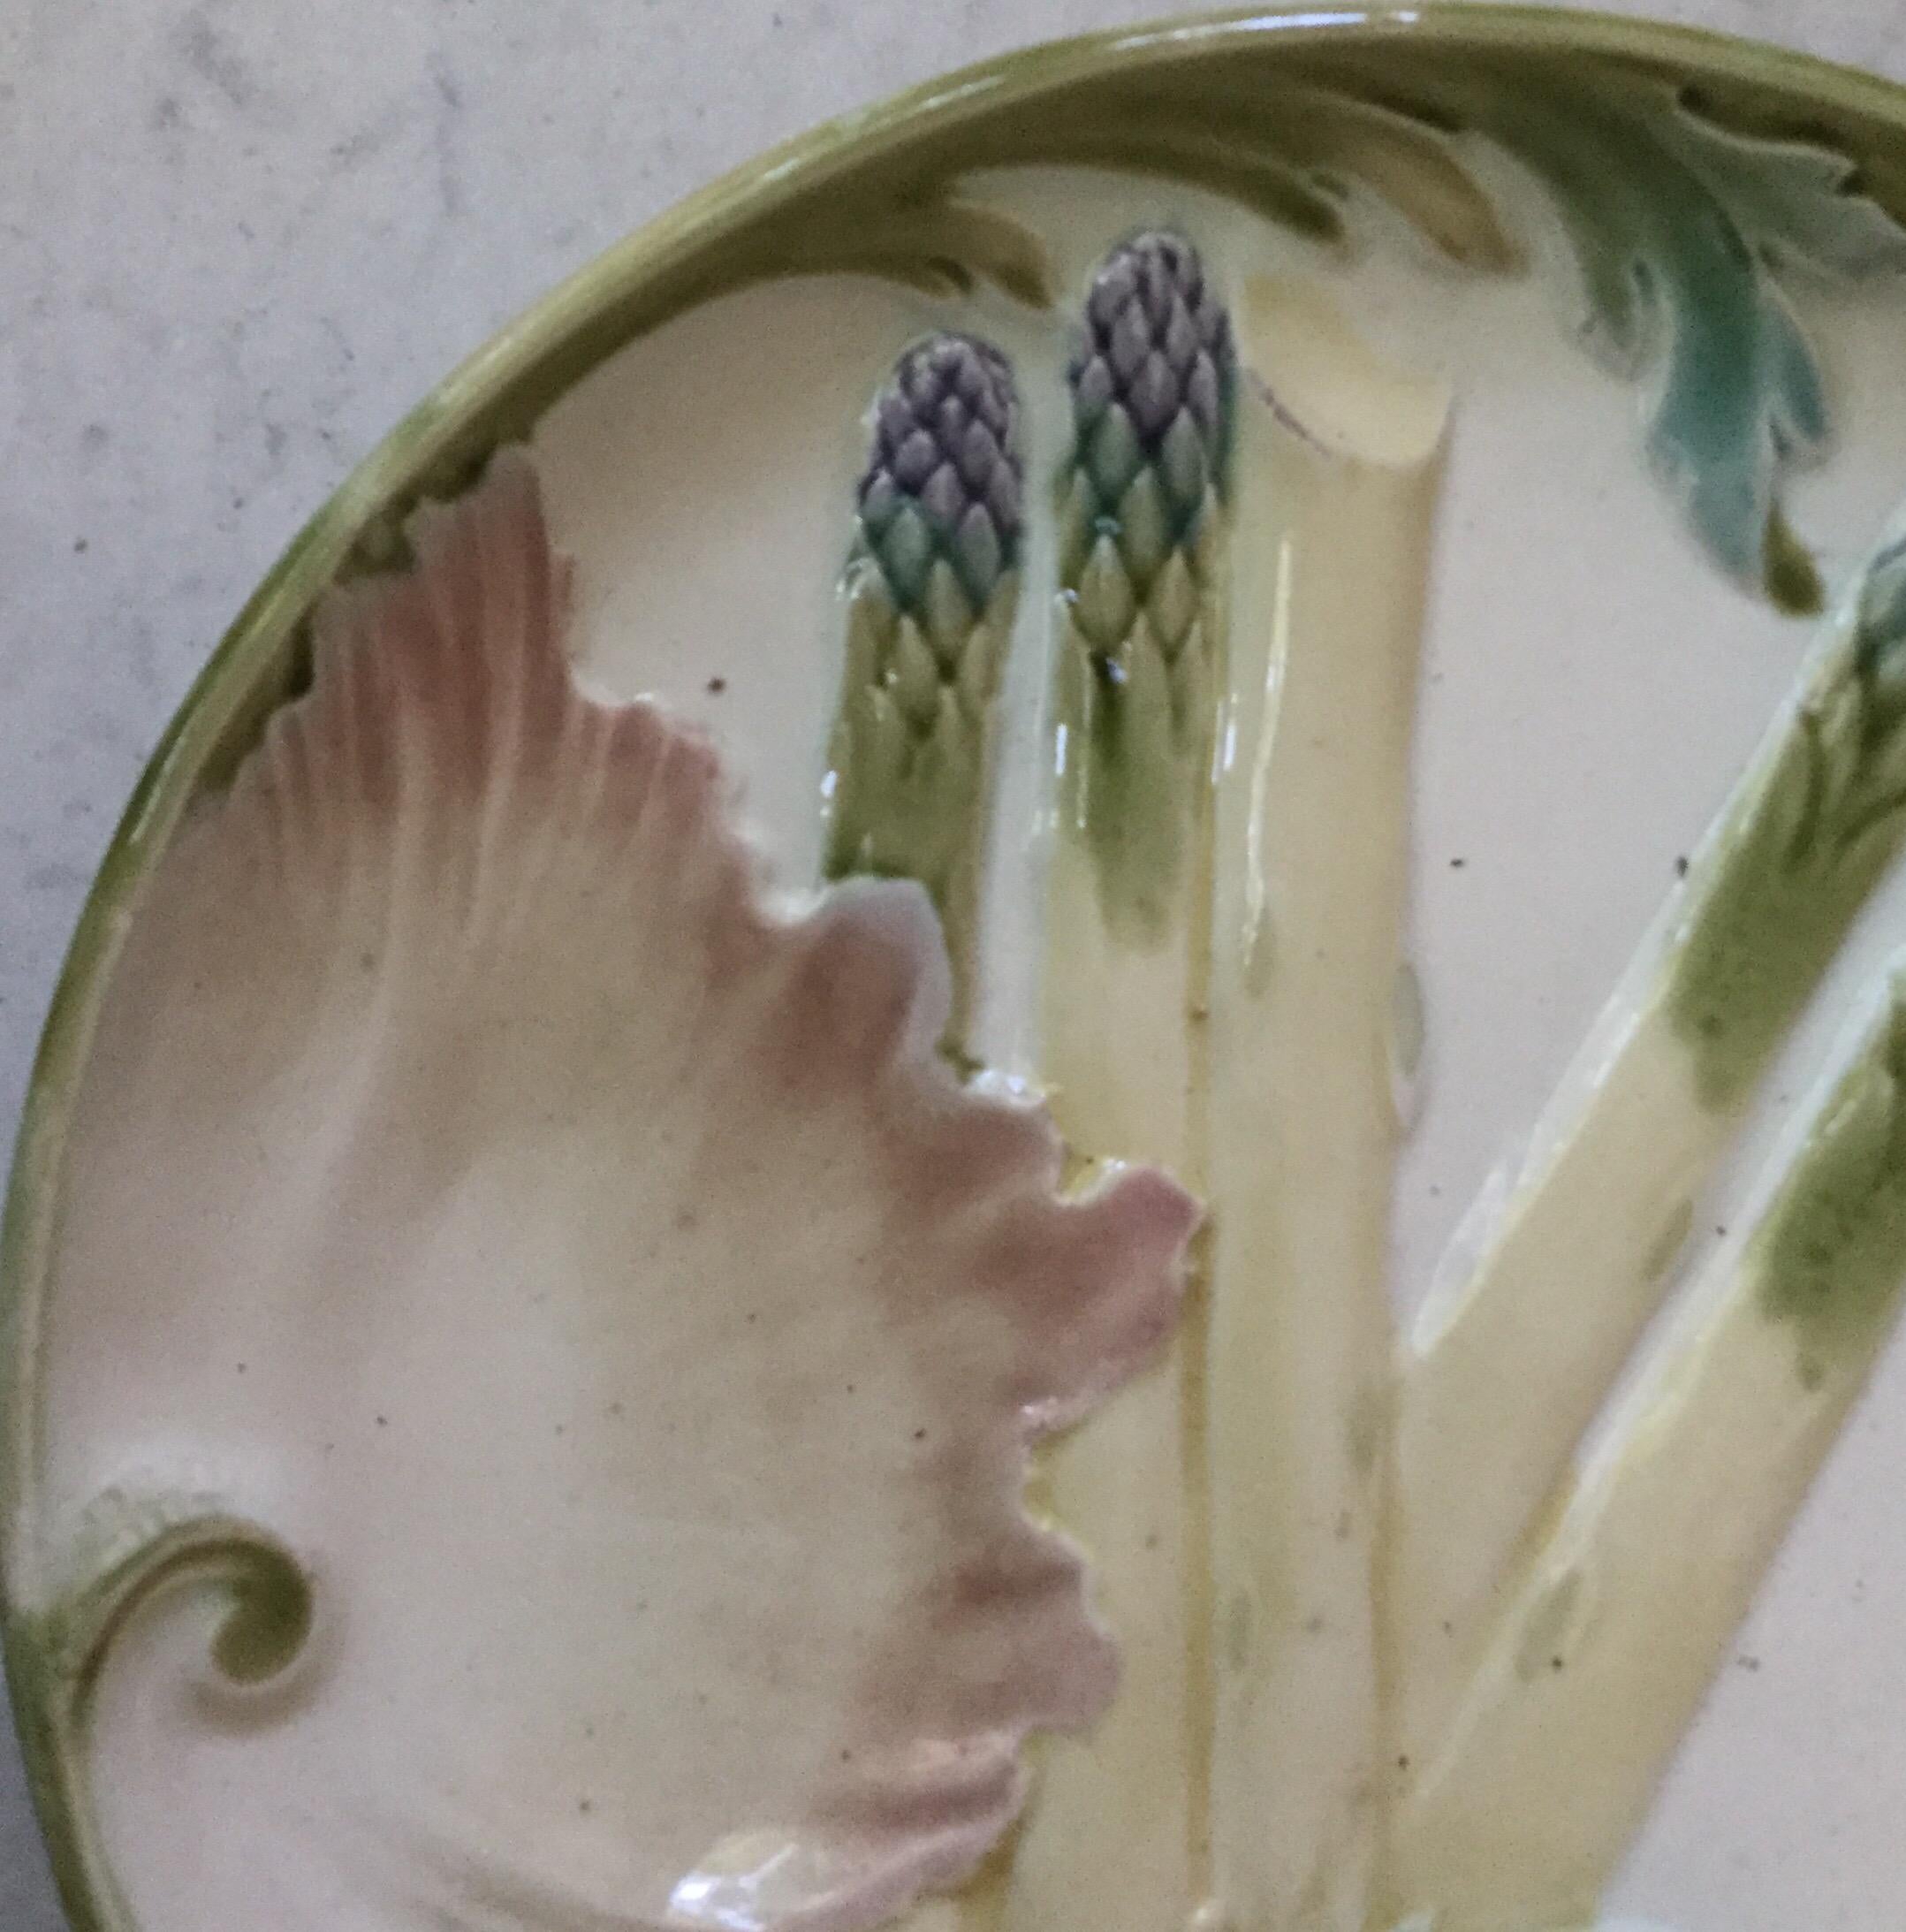 Large Majolica asparagus plate signed Keller et Guerin Luneville, circa 1880.
This plate exist in different colors and sizes this one is the largest size.
A set of smaller size is also available.